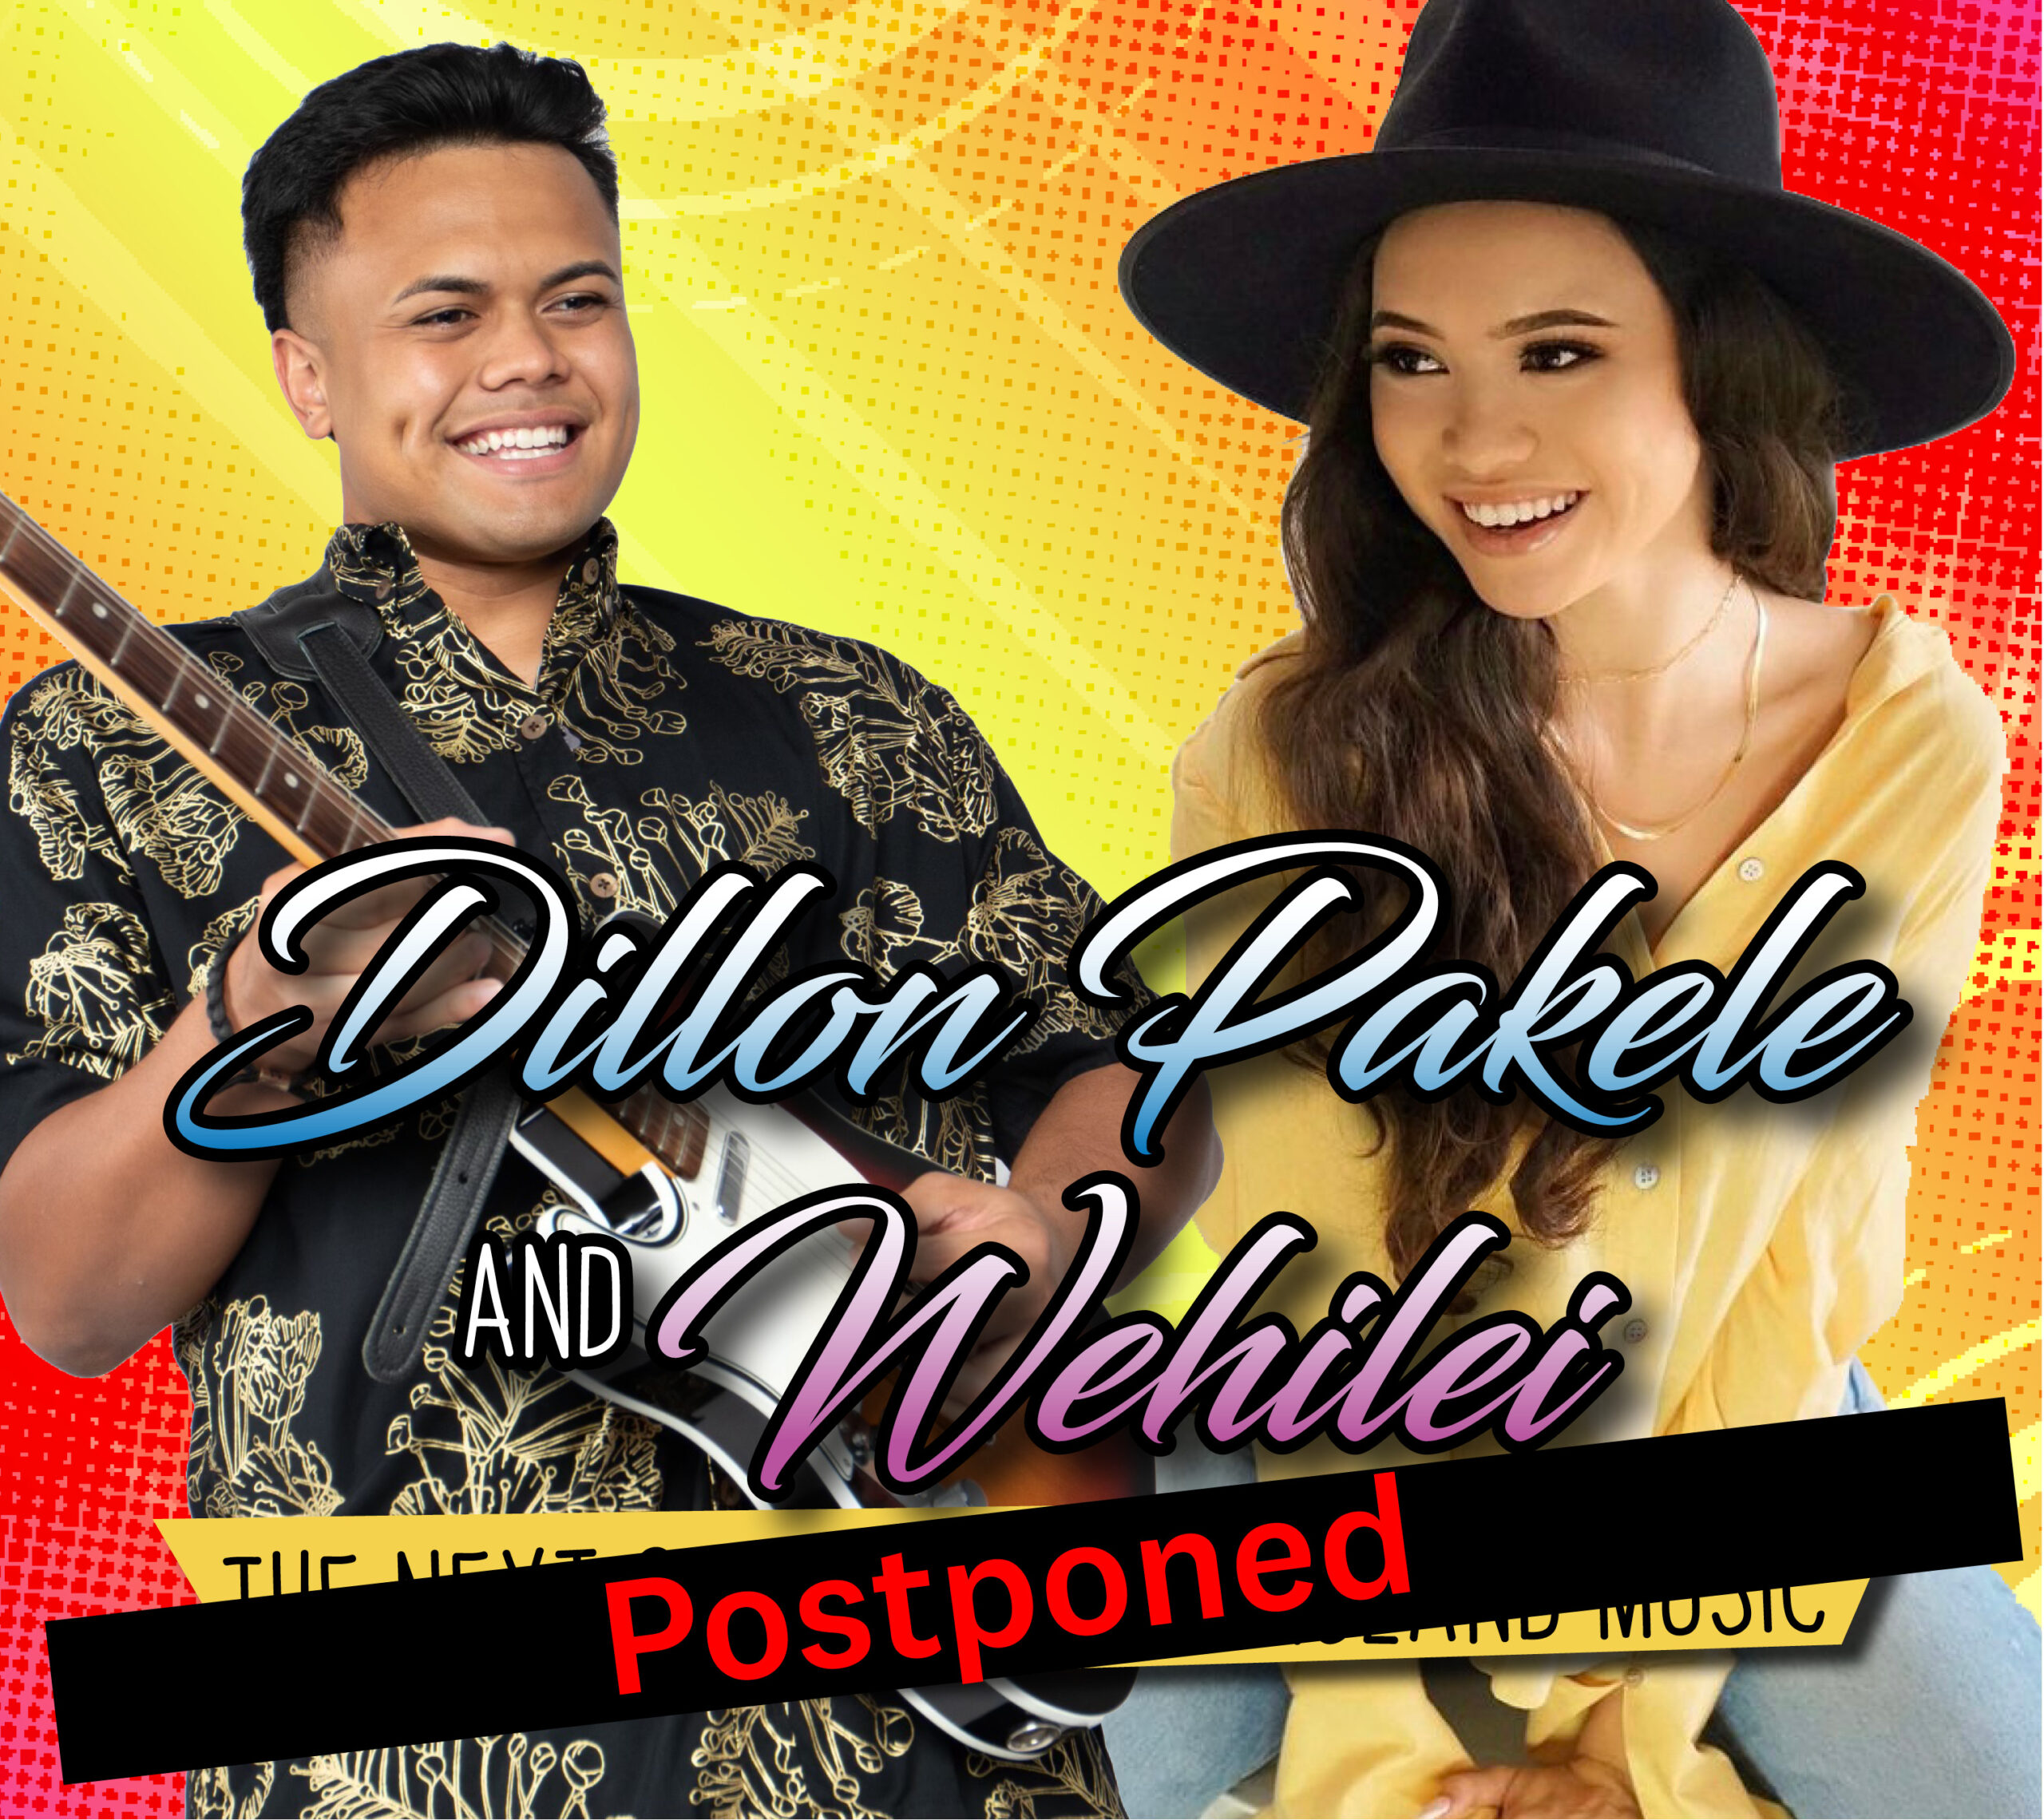 Dillon pakee and weli postponed.